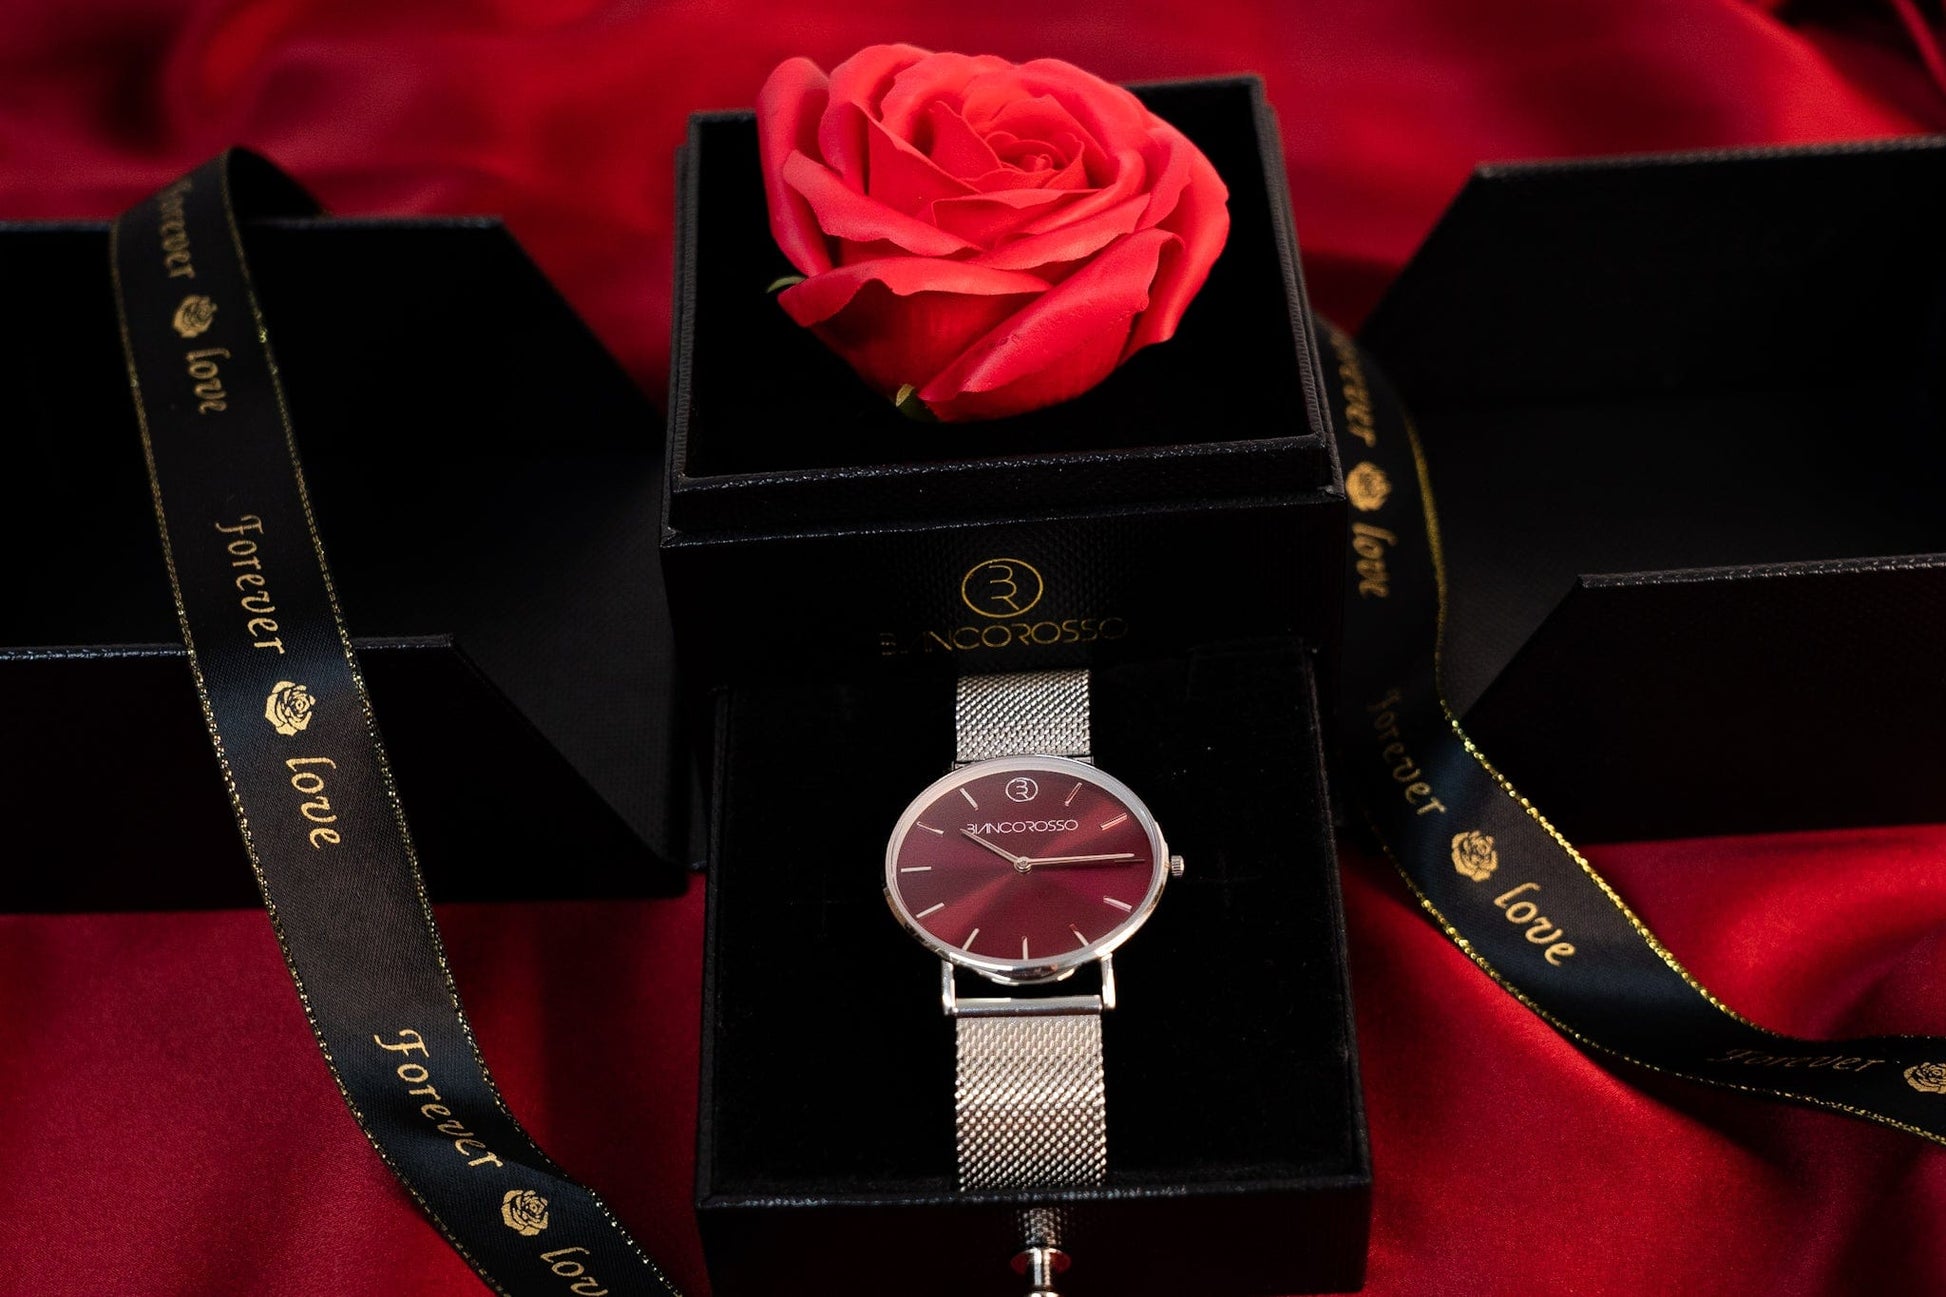 bianco rosso Rose Box Watches / Silver Valentine's Gift Box - Watches cyprus greece jewelry gift free shipping europe worldwide